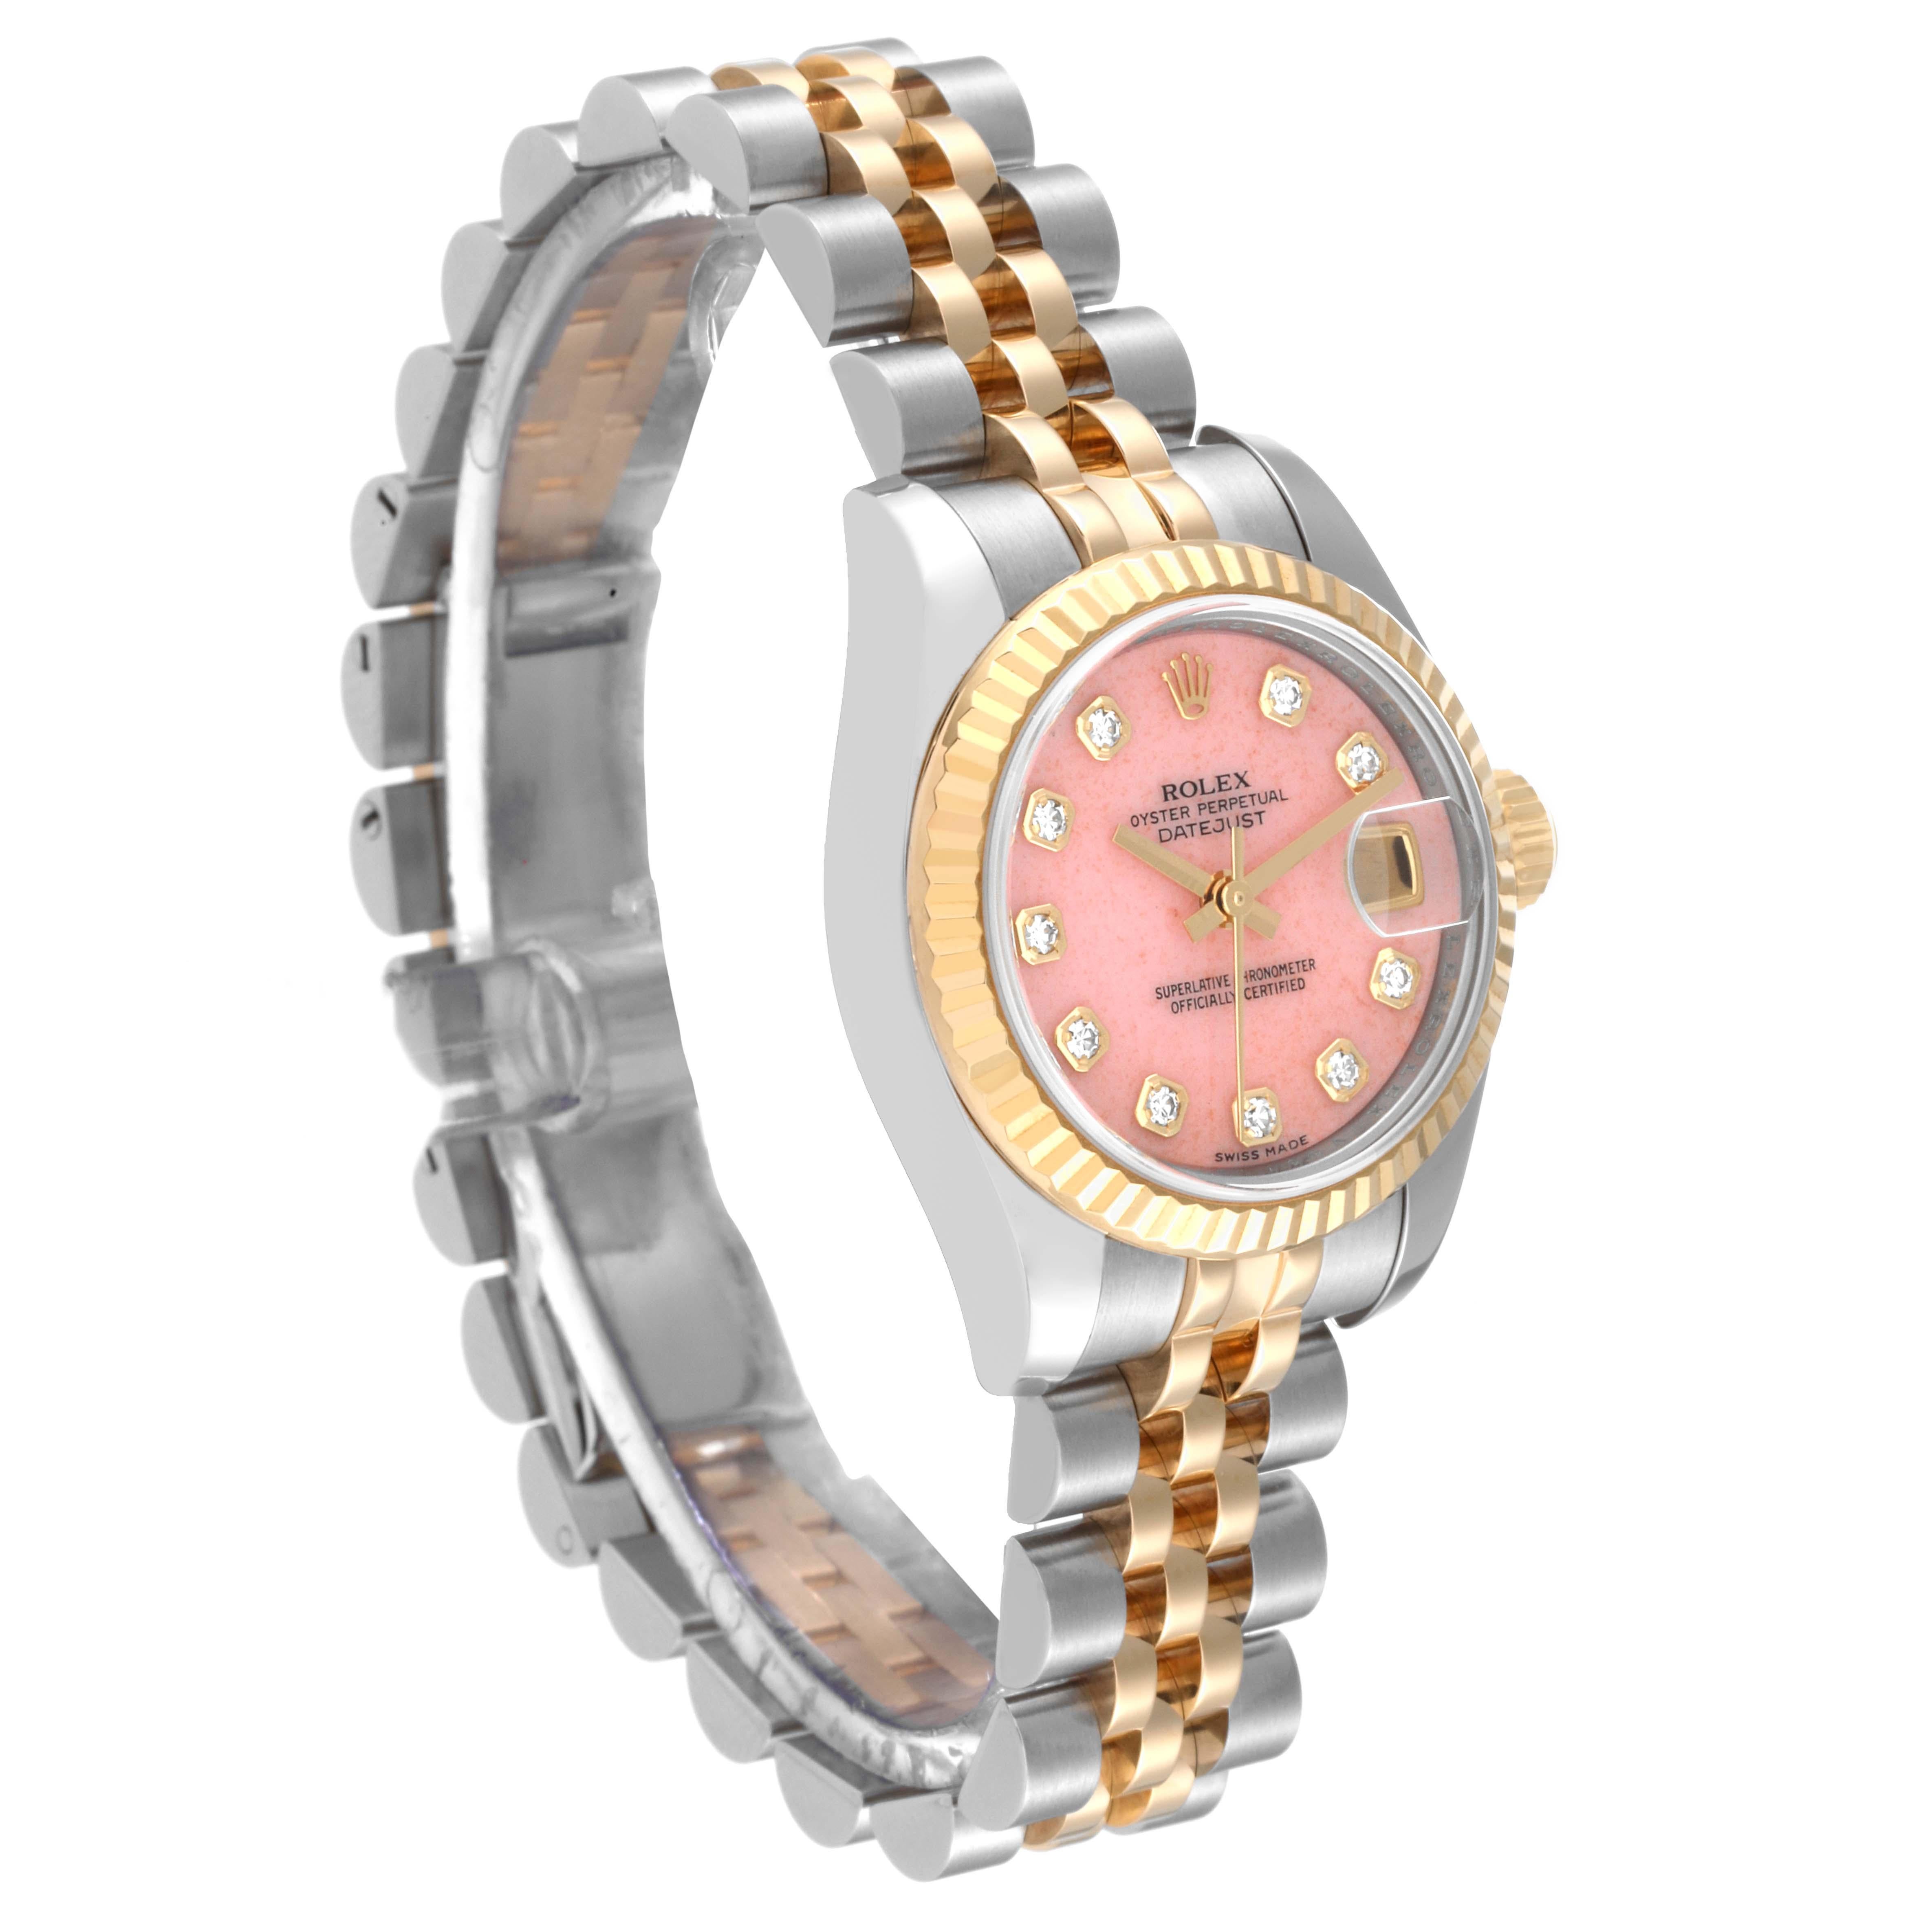 Rolex Datejust Steel Yellow Gold Coral Diamond Dial Ladies Watch 179173 In Excellent Condition For Sale In Atlanta, GA